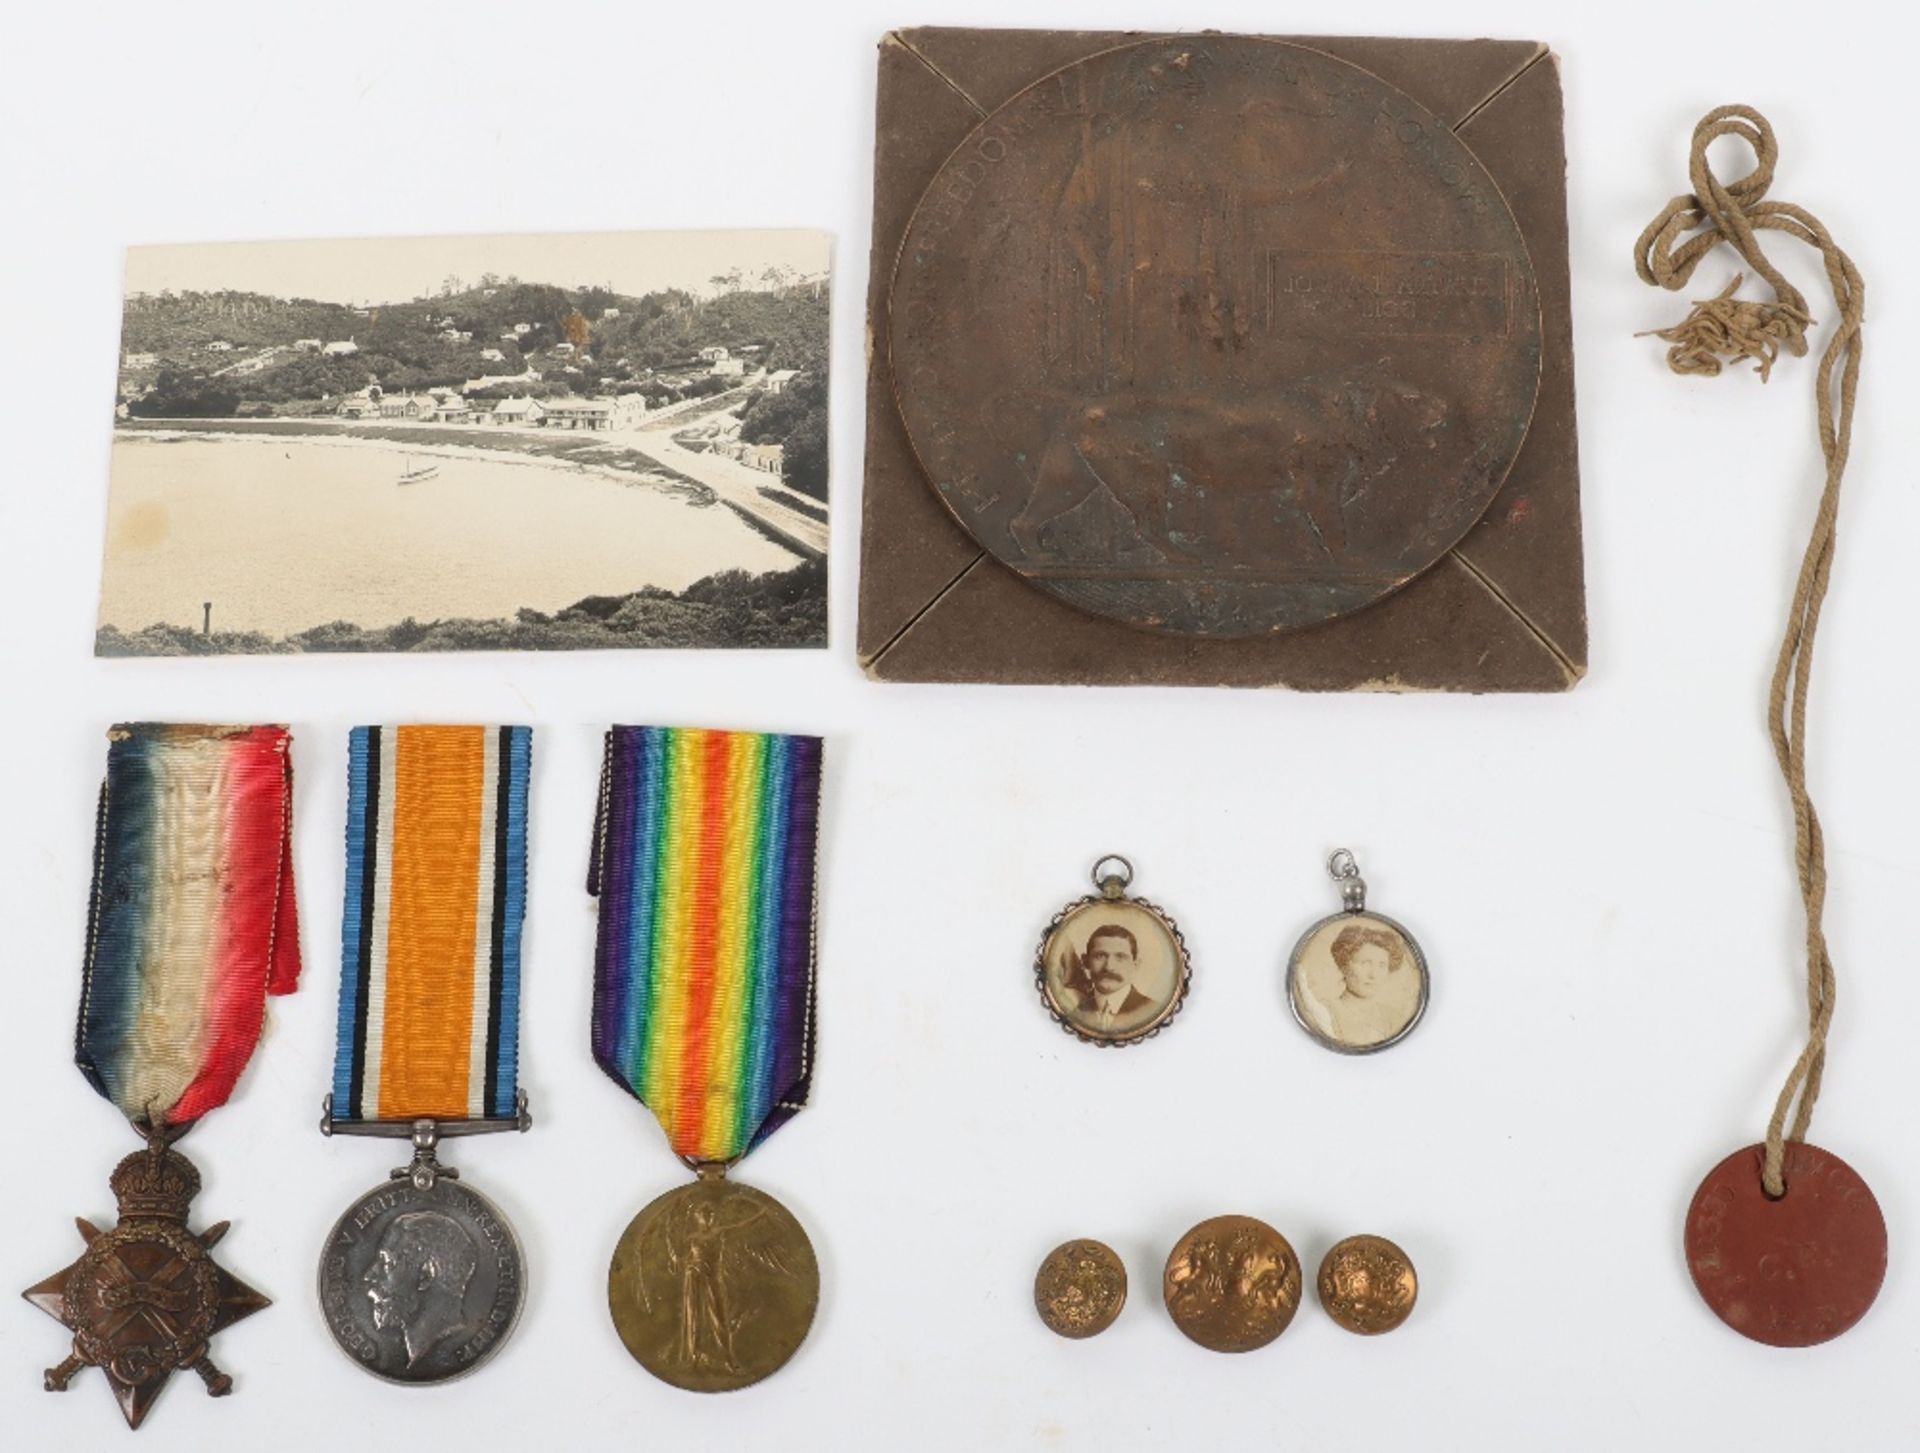 WW1 July 1916 Royal Fusiliers Killed in Action Medal Trio and Memorial Plaque Grouping